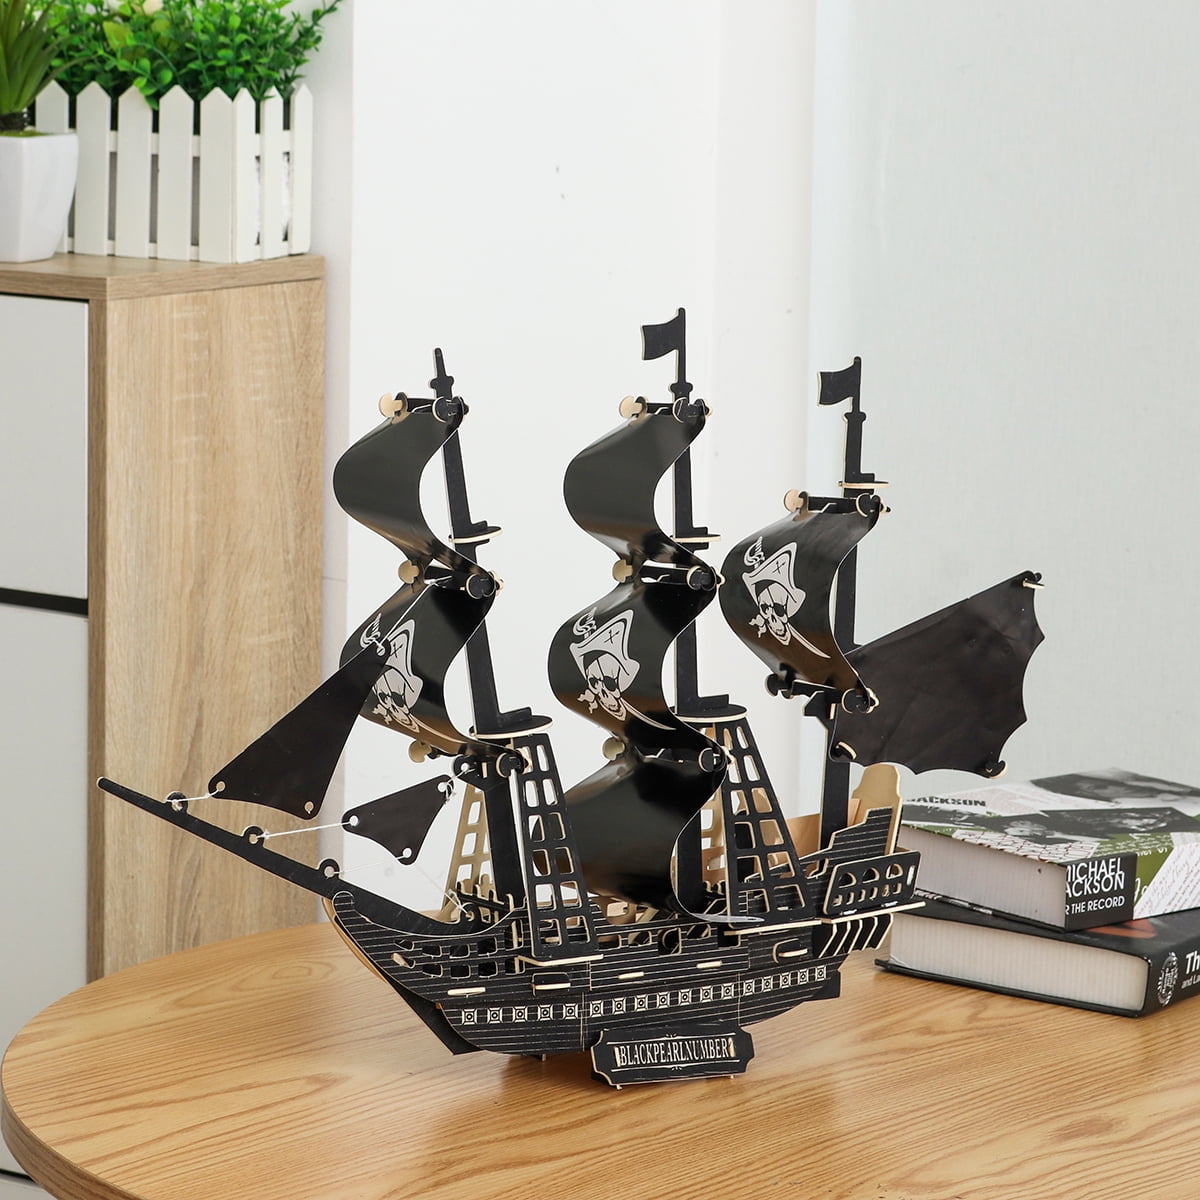 3D Metal Jigsaw Puzzles Mechanical Boat DIY Brain Teaser Education Toy Gift 